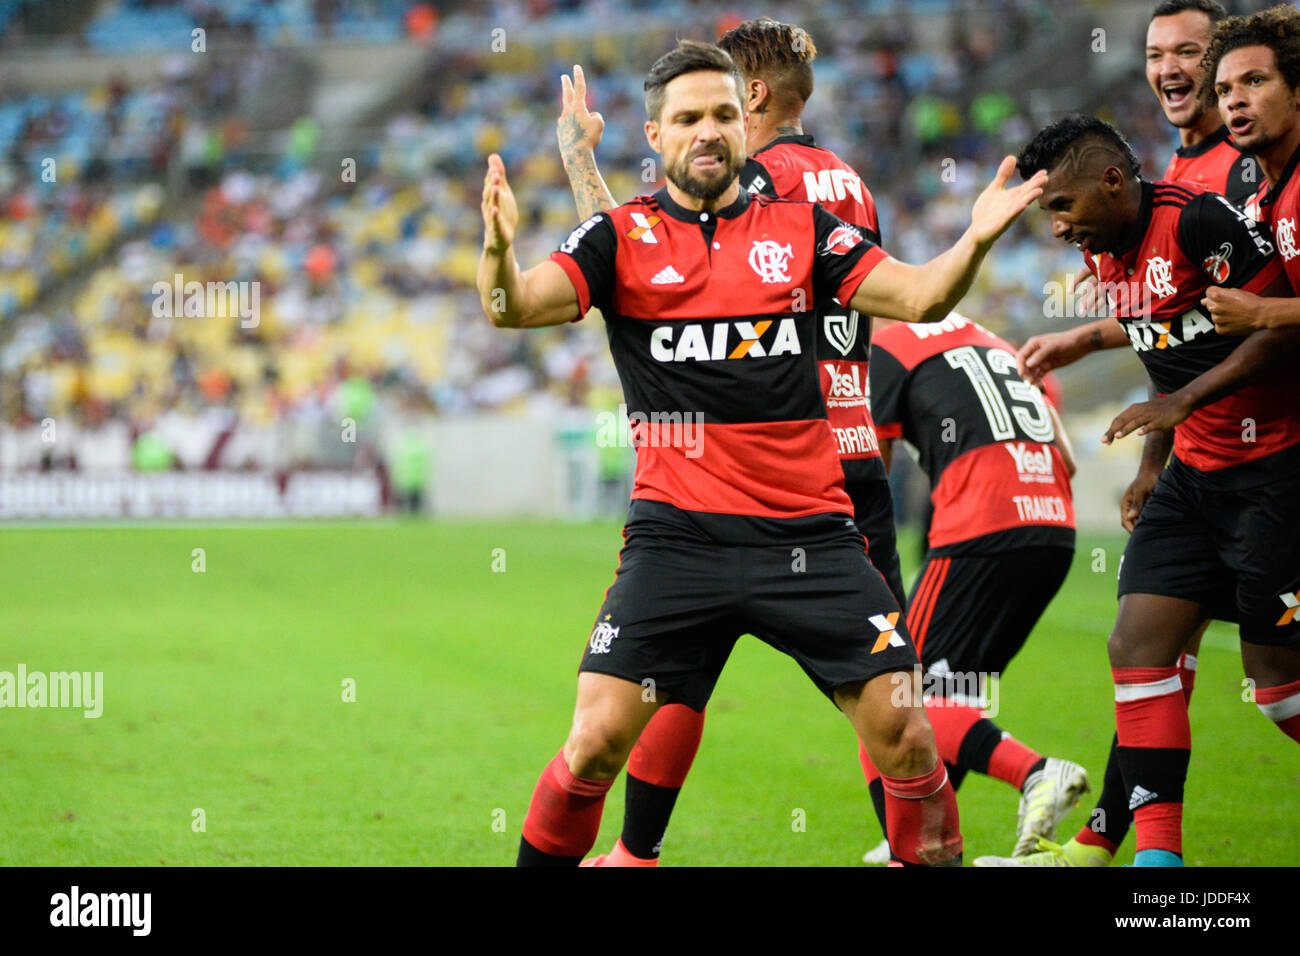 Diego, Flamengo player celebrates goal during match against Fluminense in a game valid for the eighth round of the Brazilian Campenato at the Maracanã stadium in Rio de Janeiro, on Sunday, 18. (PHOTO: CLEVER FELIX/BRAZIL PHOTO PRESS) Stock Photo